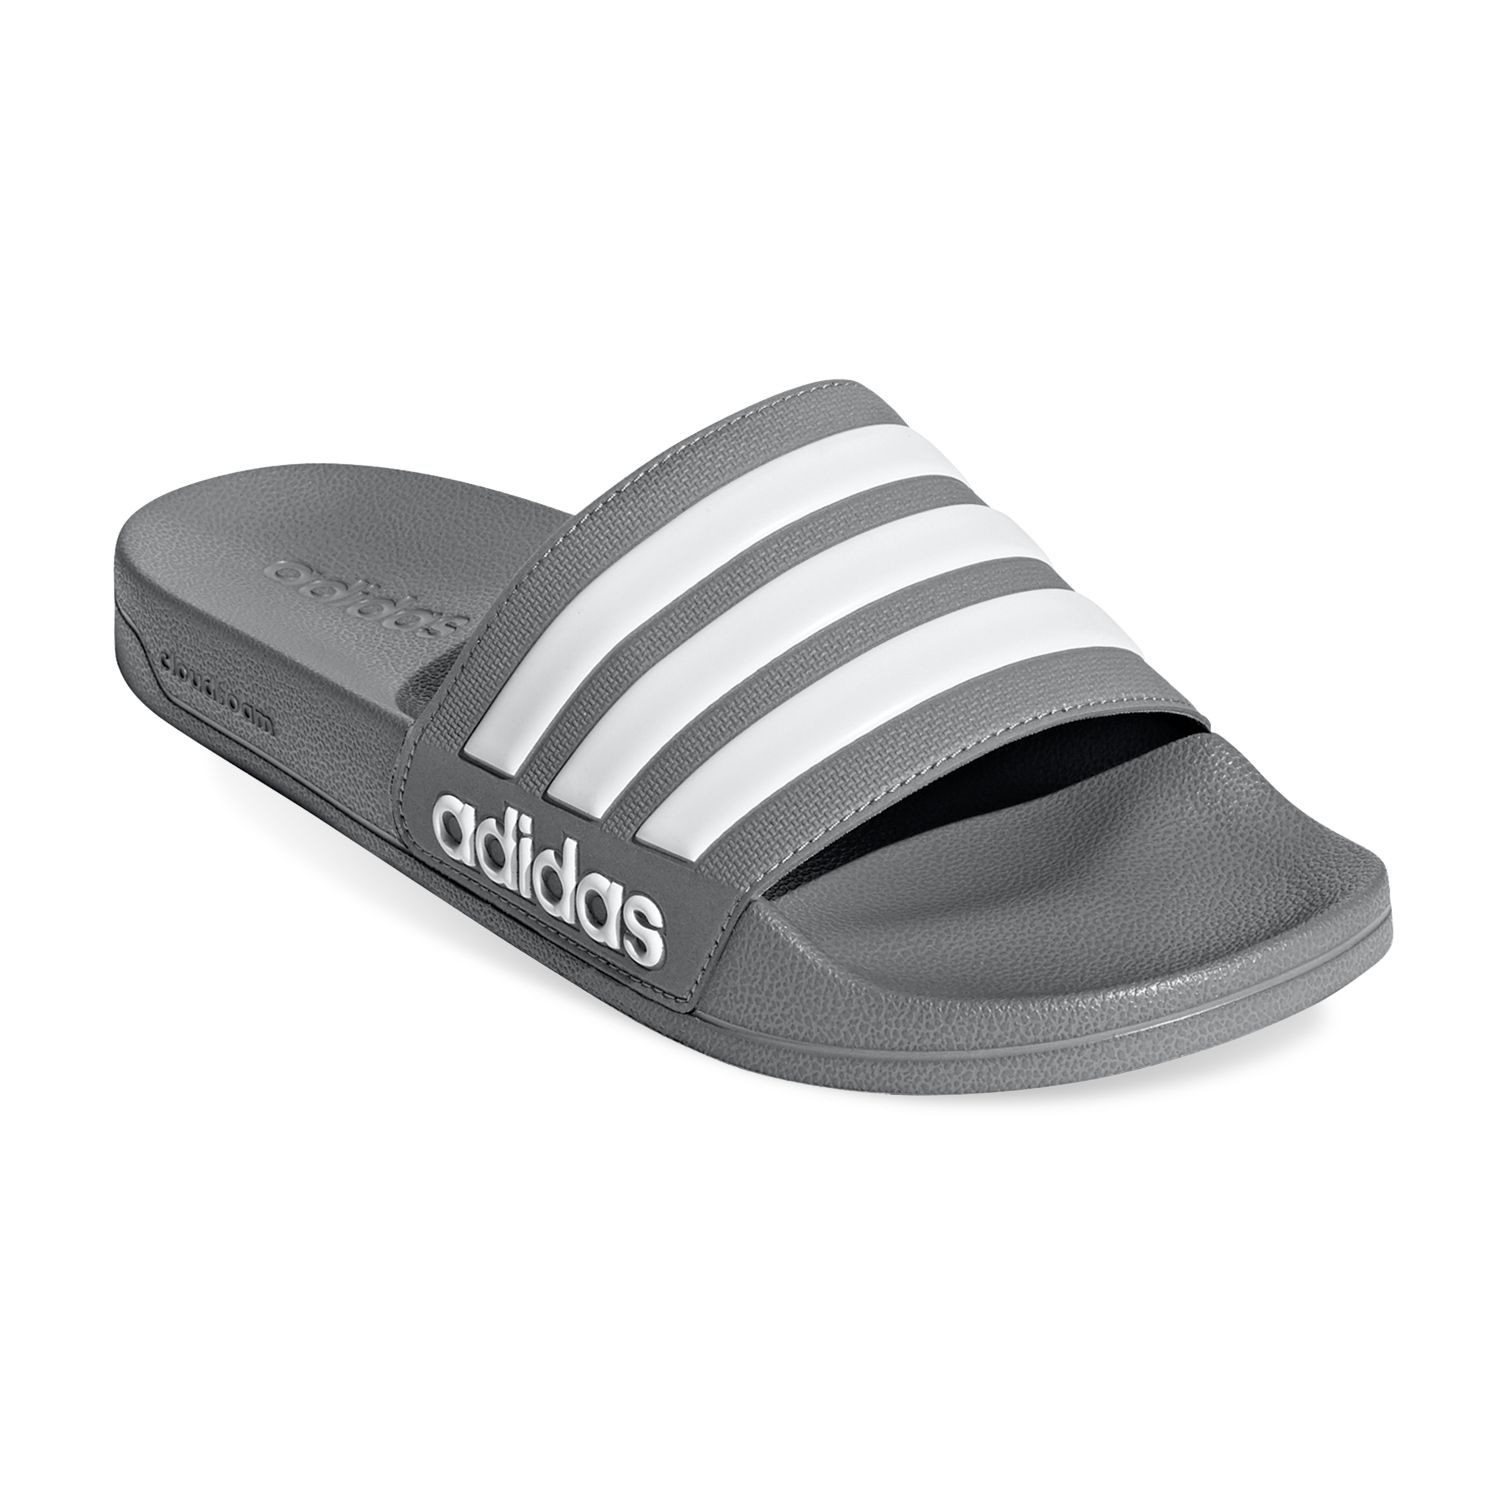 adidas slippers for sale